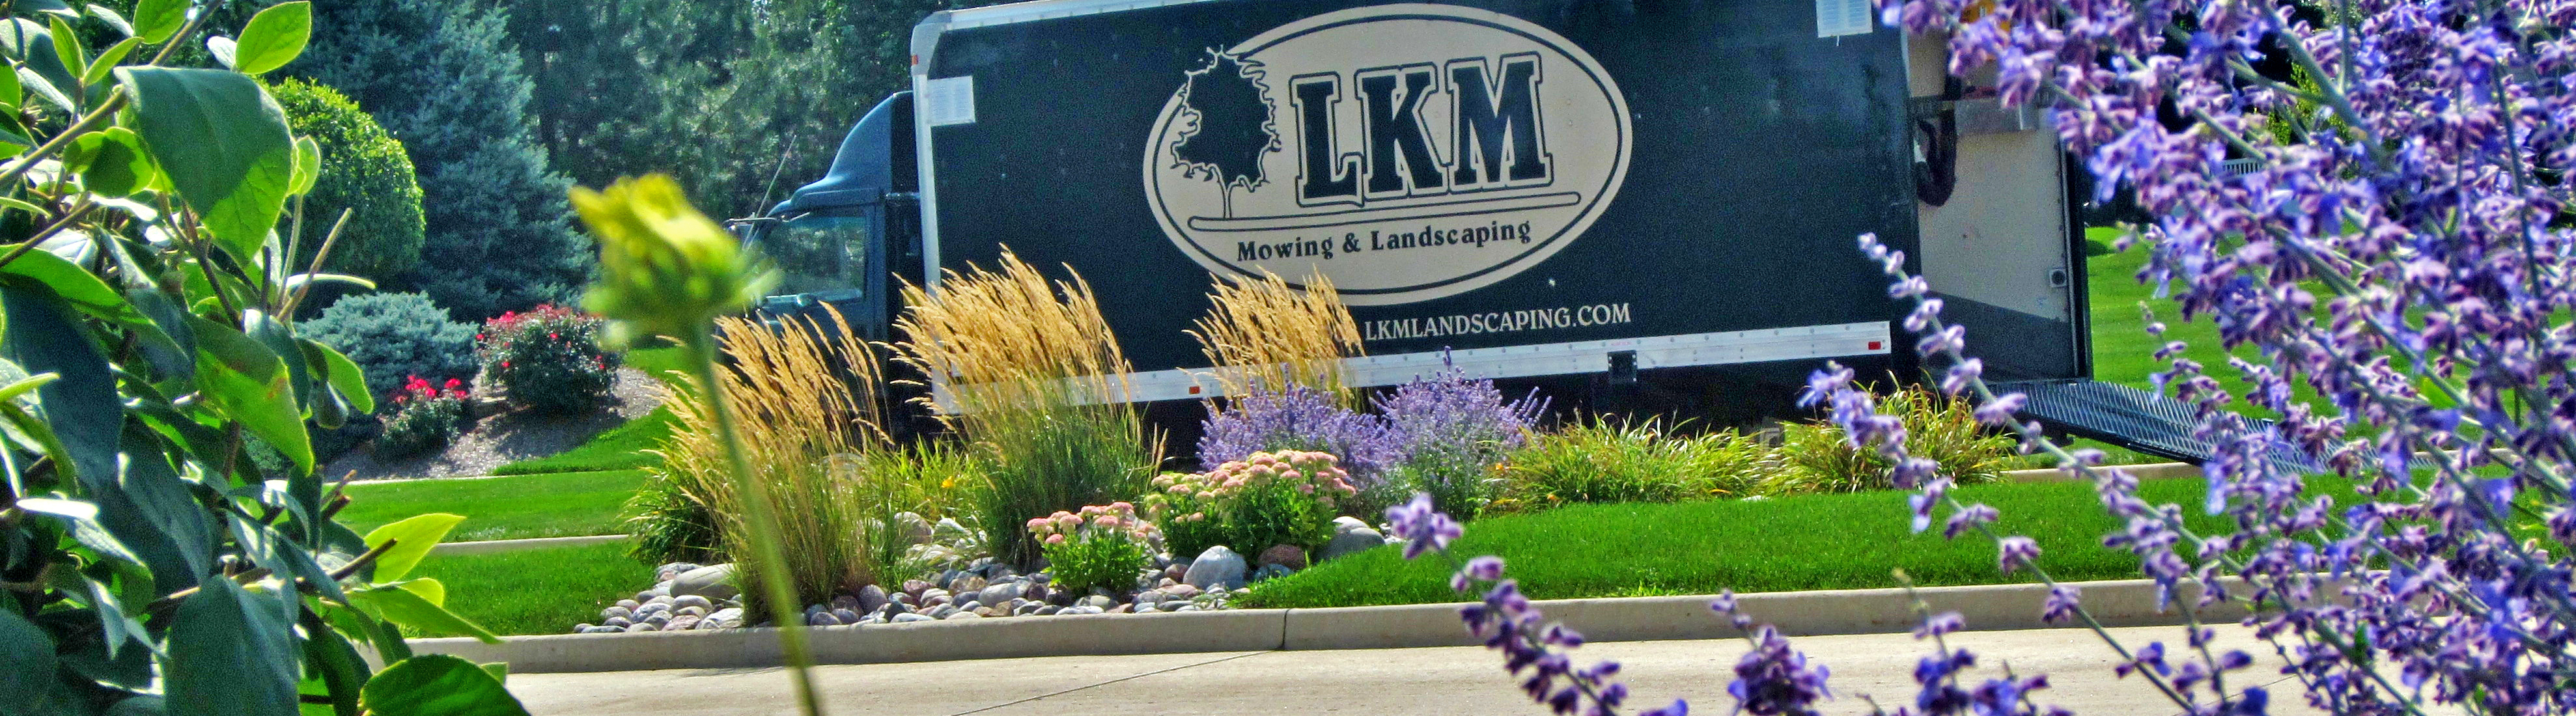 Lkm Landscaping Serving All Of, Landscaping Normal Il